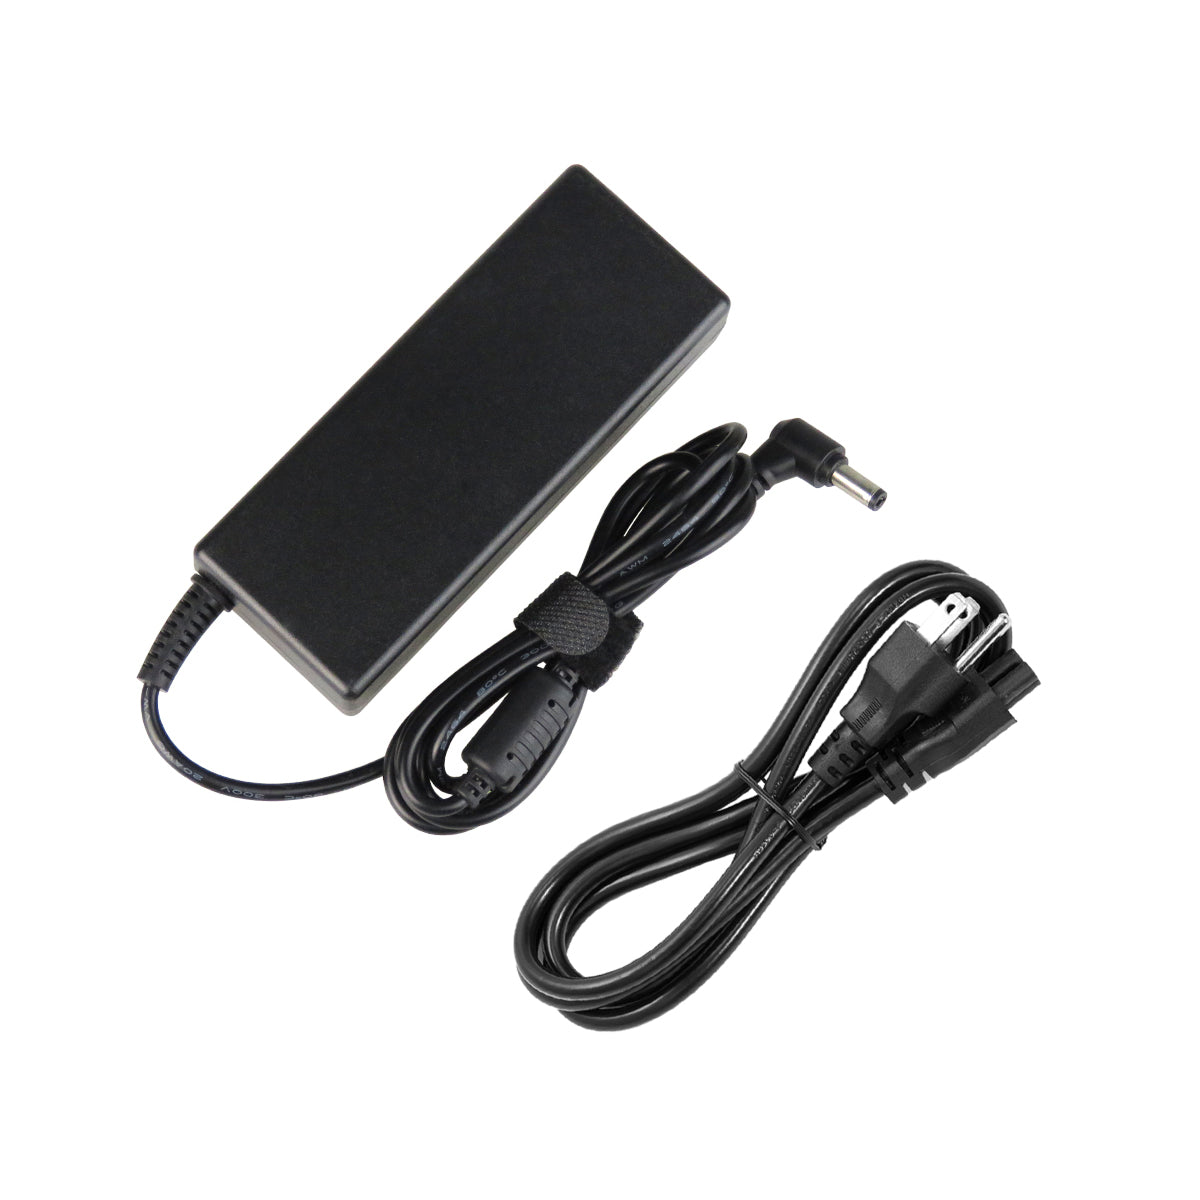 AC Adapter Charger for ASUS K43U Notebook.